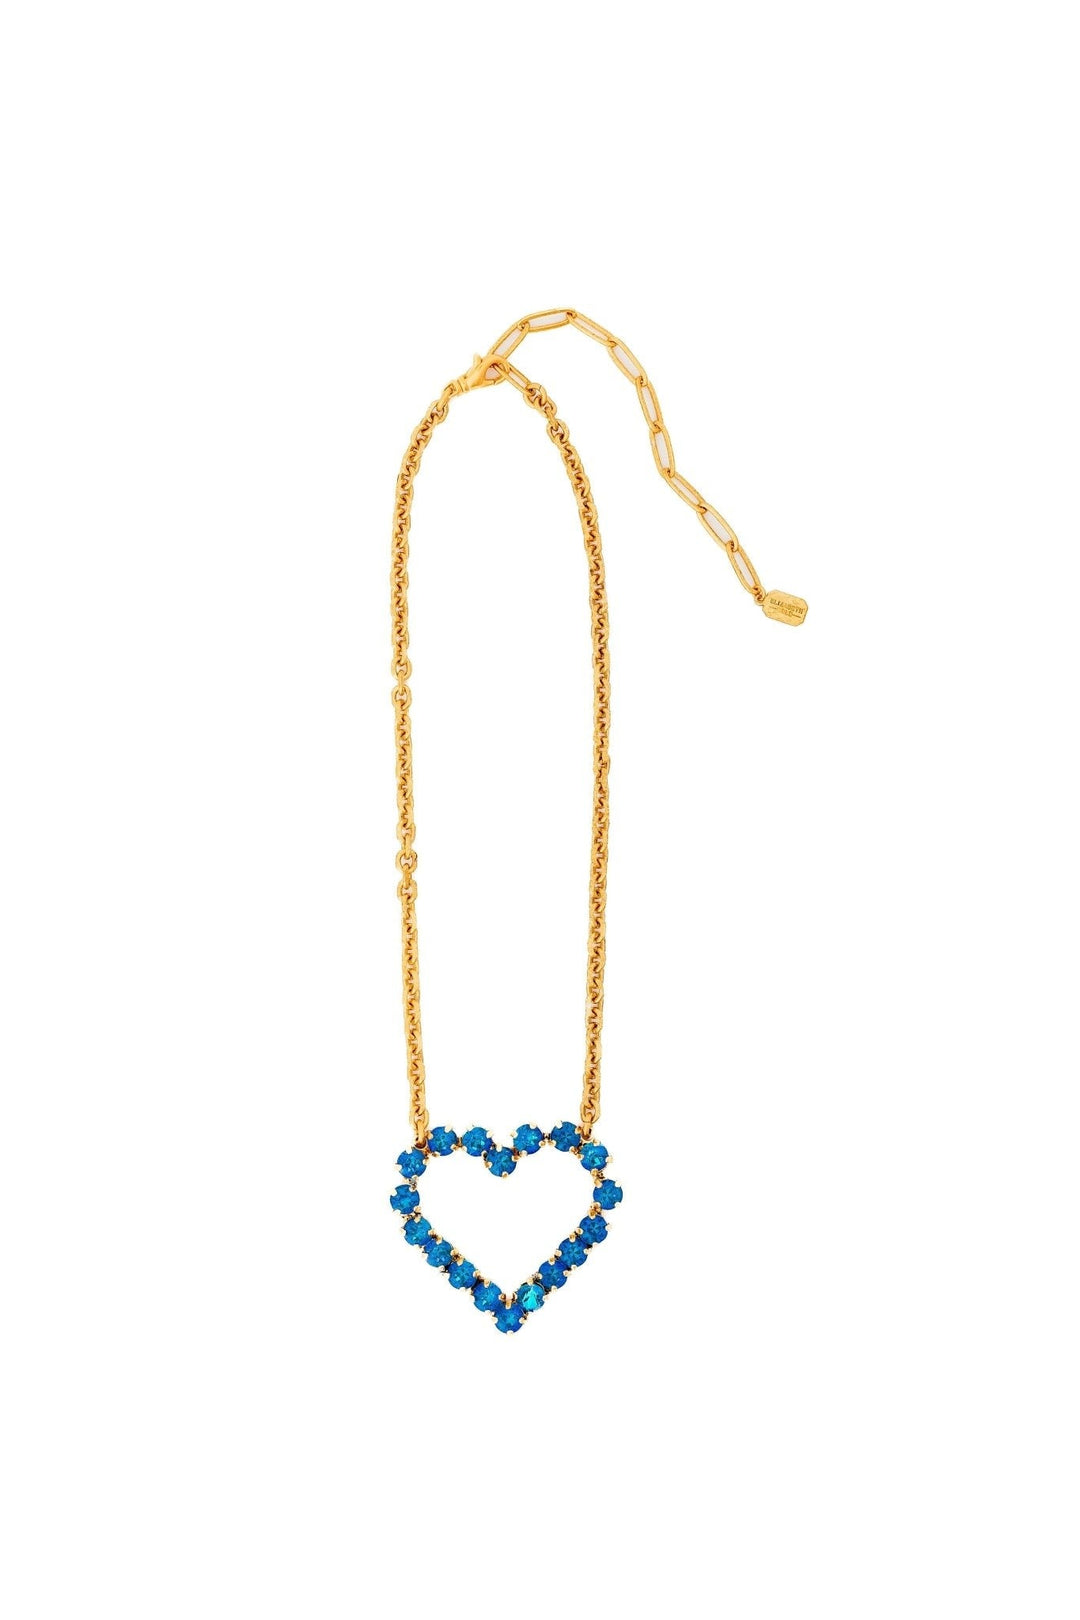 AMORA NECKLACE IN BLUE